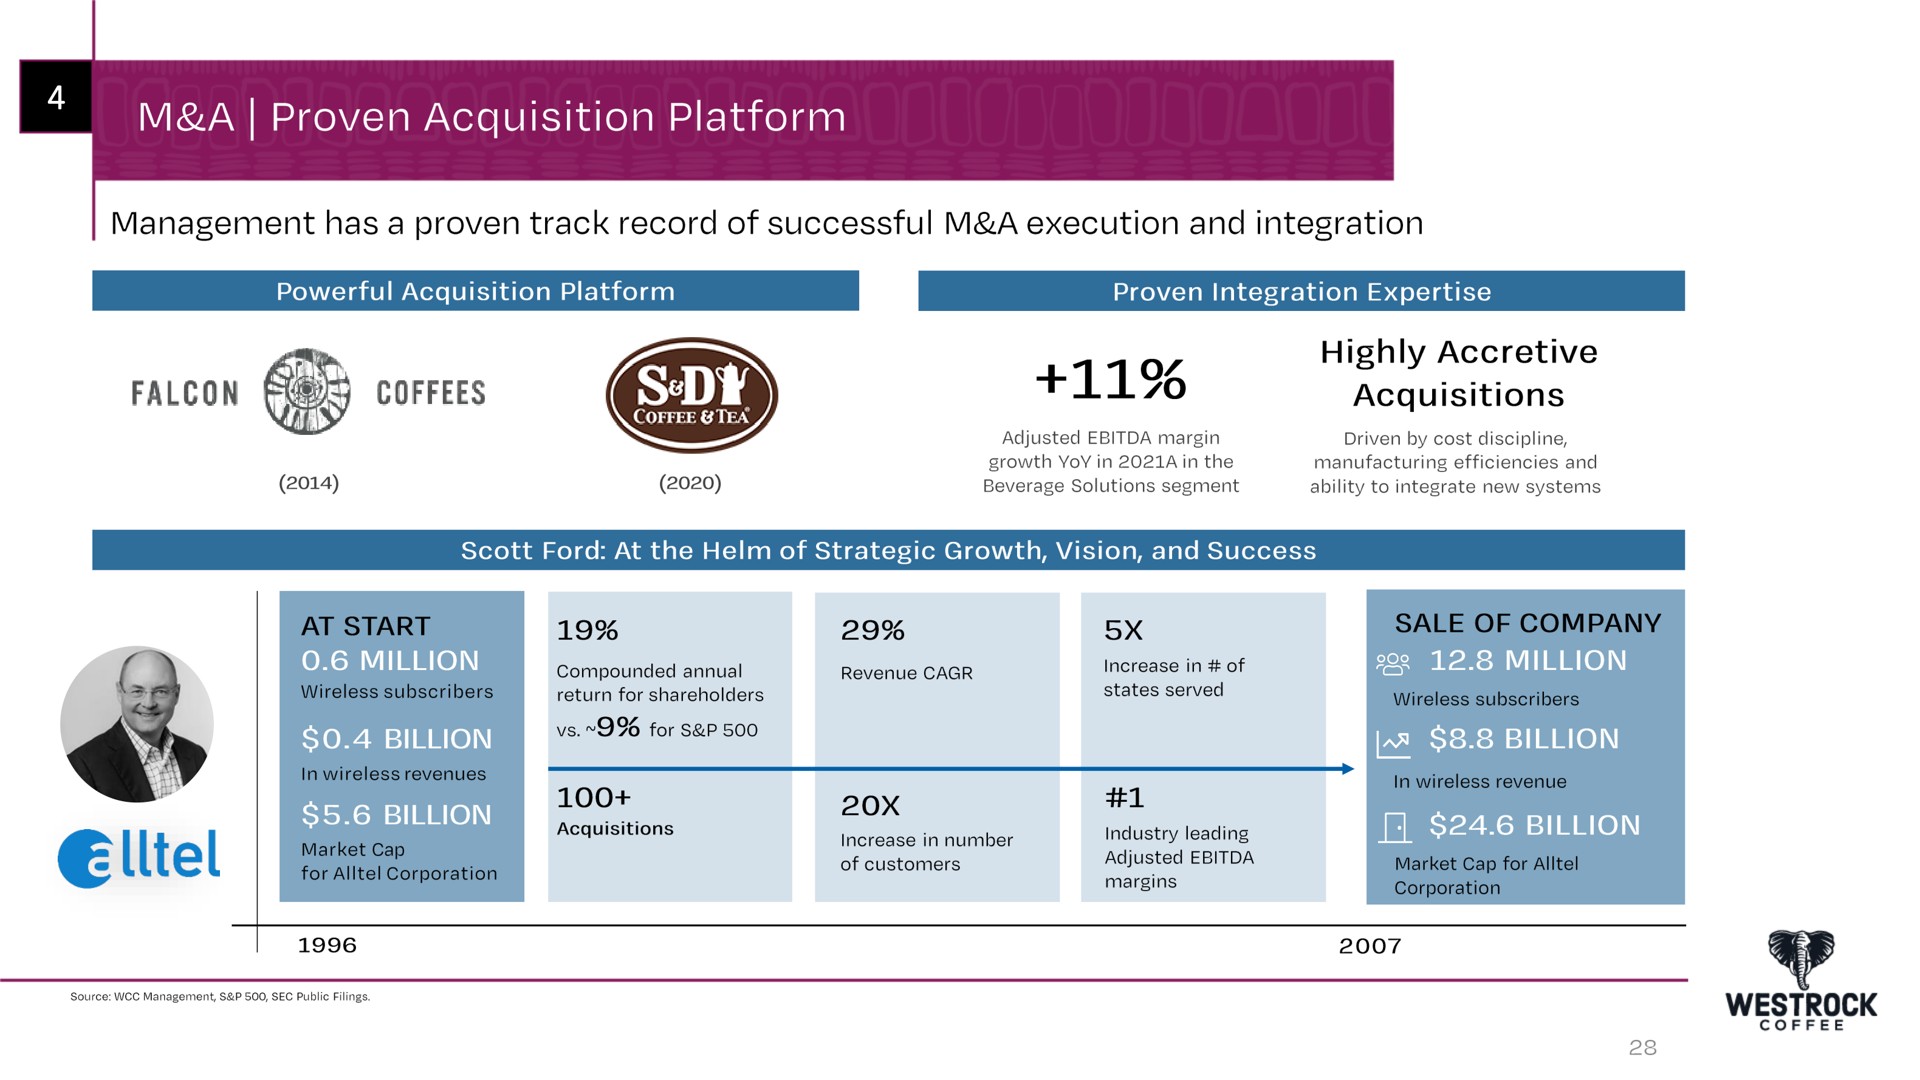 a proven acquisition platform nee for sar | Westrock Coffee